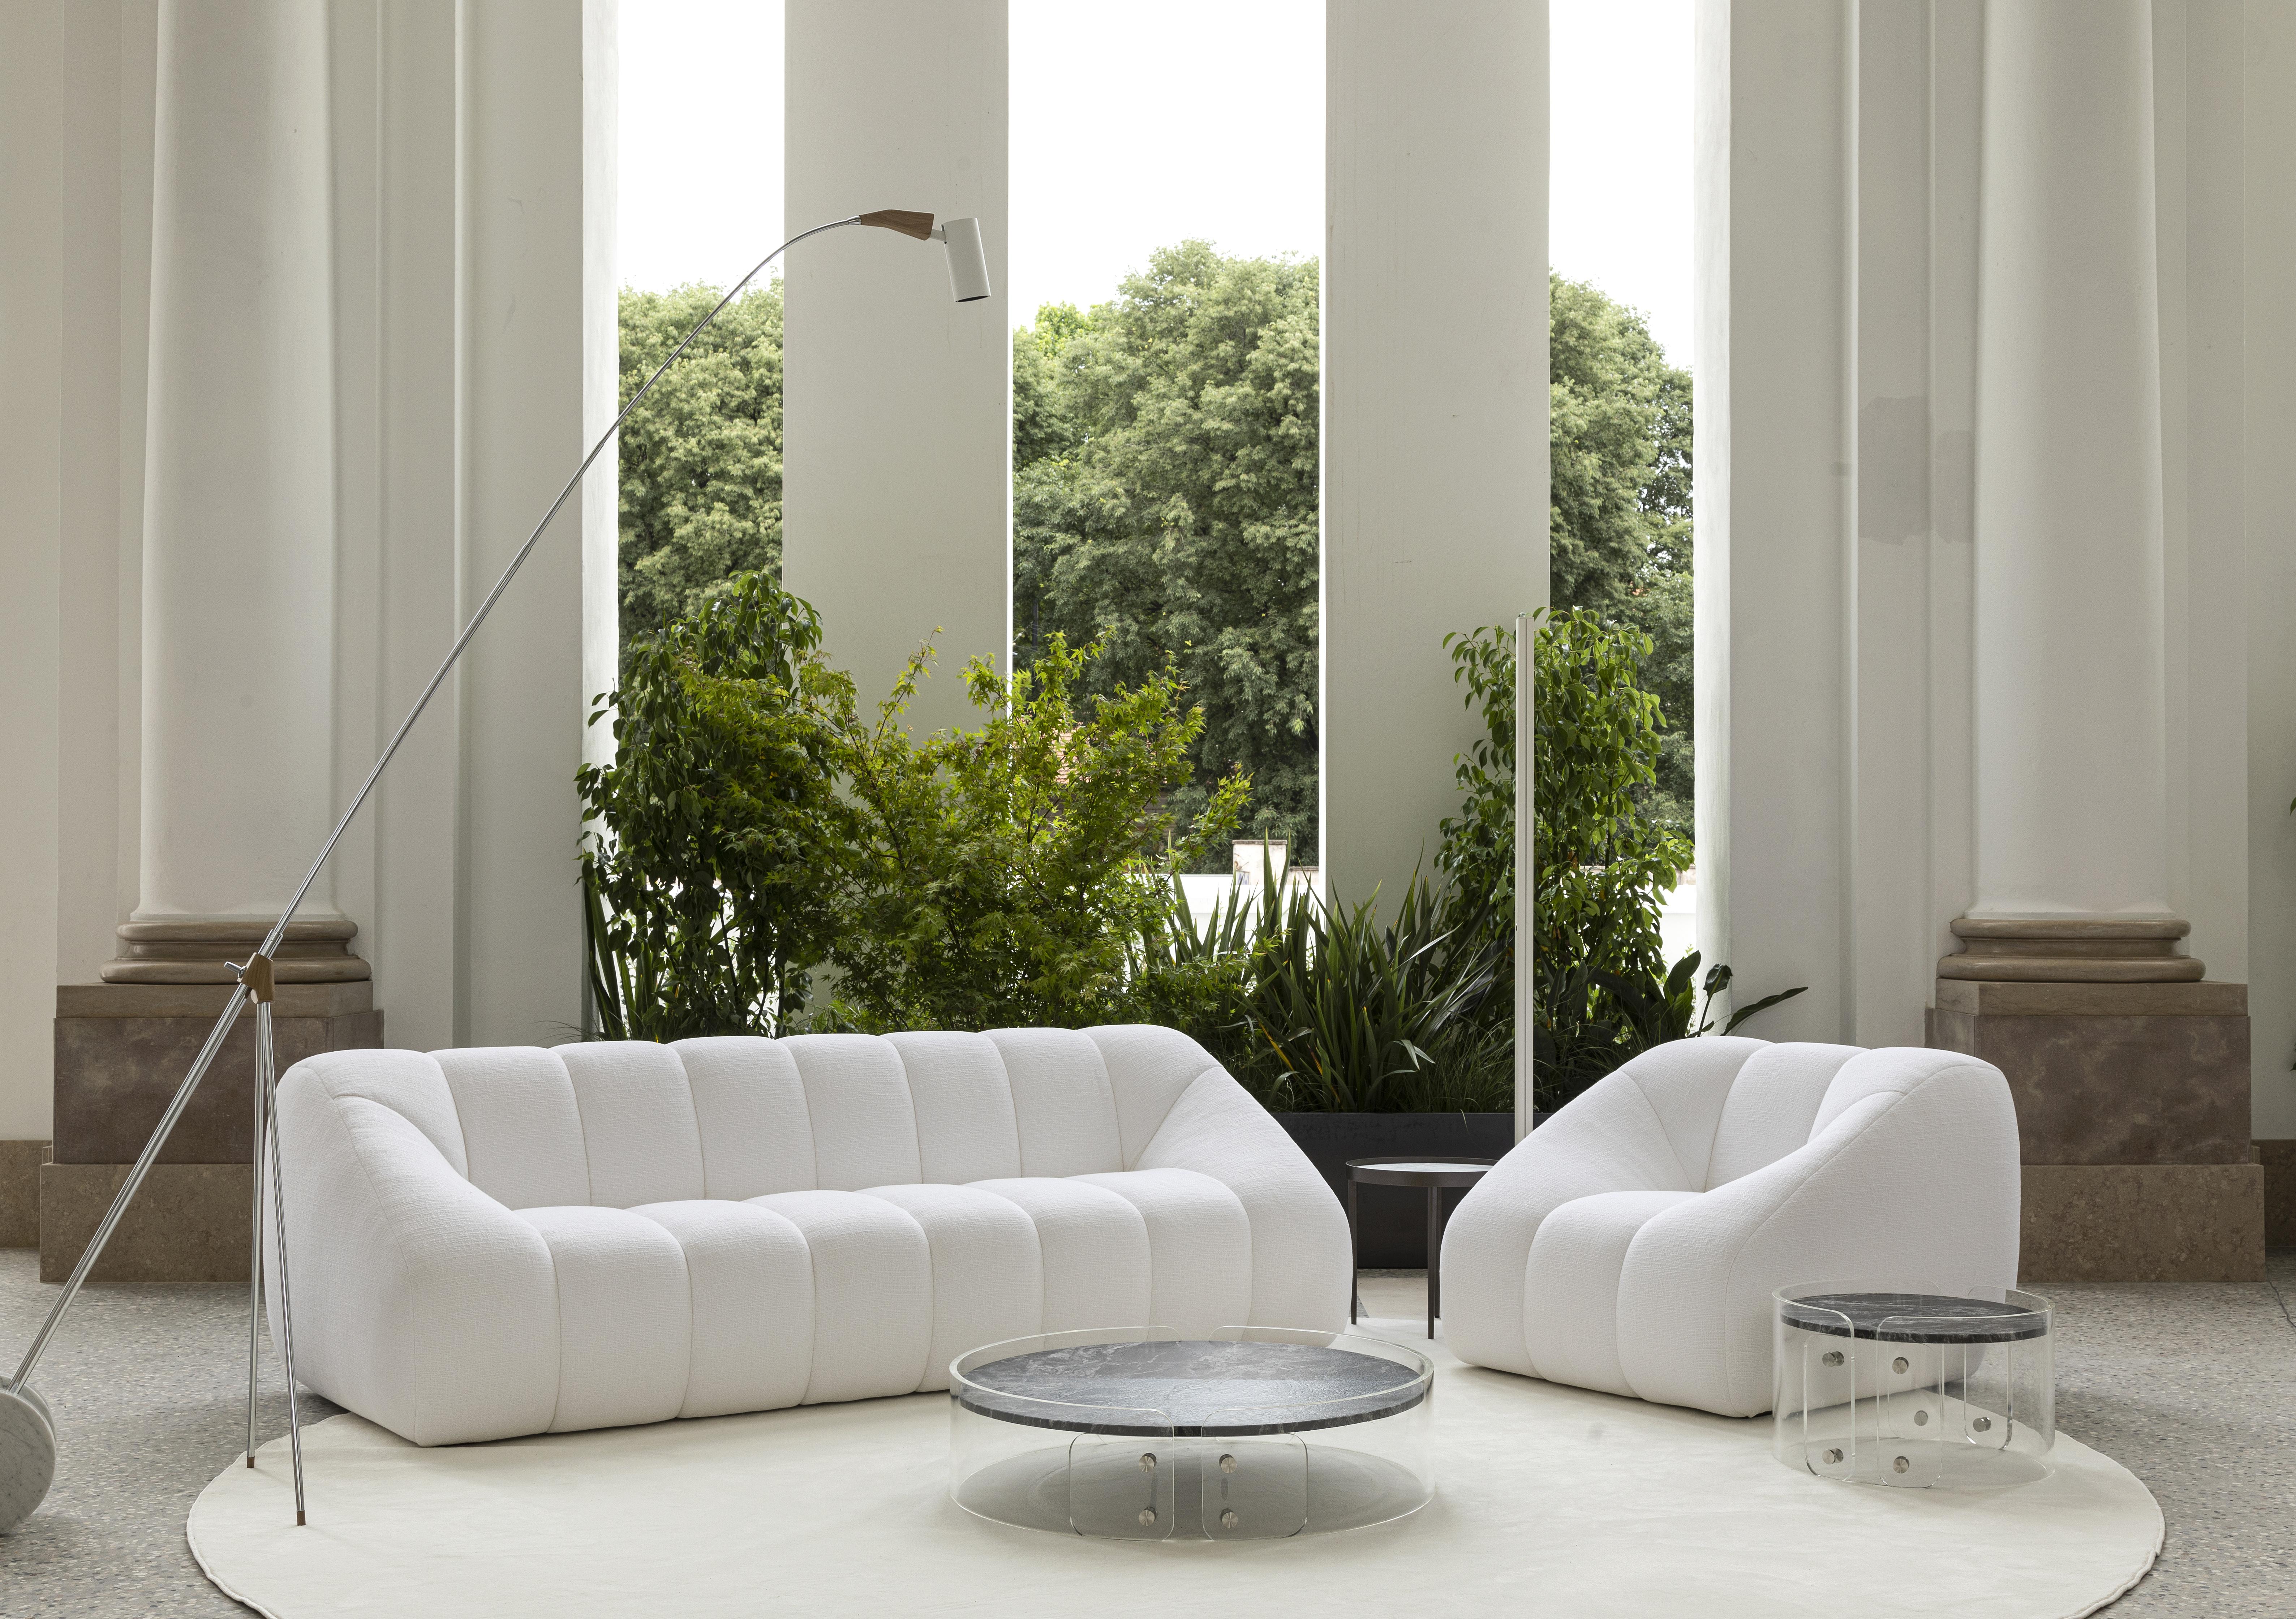 The Di Nuovo sofa echoes the characteristic lines of 1970s design; it has an abundant and generous shape, with a wide seat and high back.
The name in Italian is meant for what this sofa represents to designer Ricardo Antonio, a sofa that welcomes us